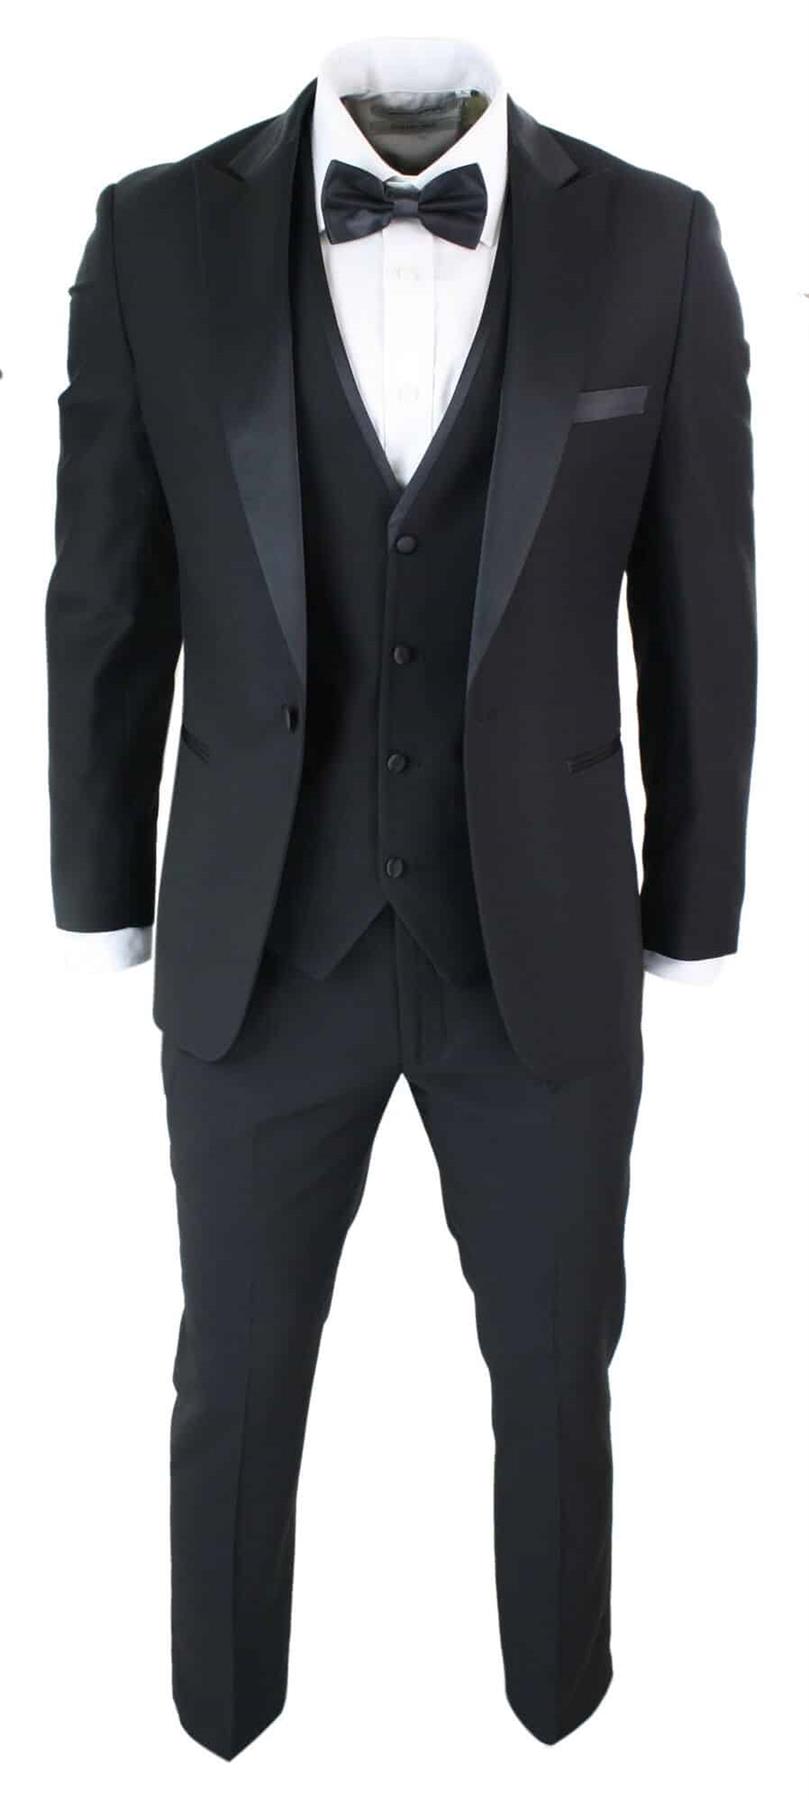 Mens 3 Piece Black Tuxedo Suit Classic Satin Dinner Tailored Fit Wedding Prom - Upperclass Fashions 